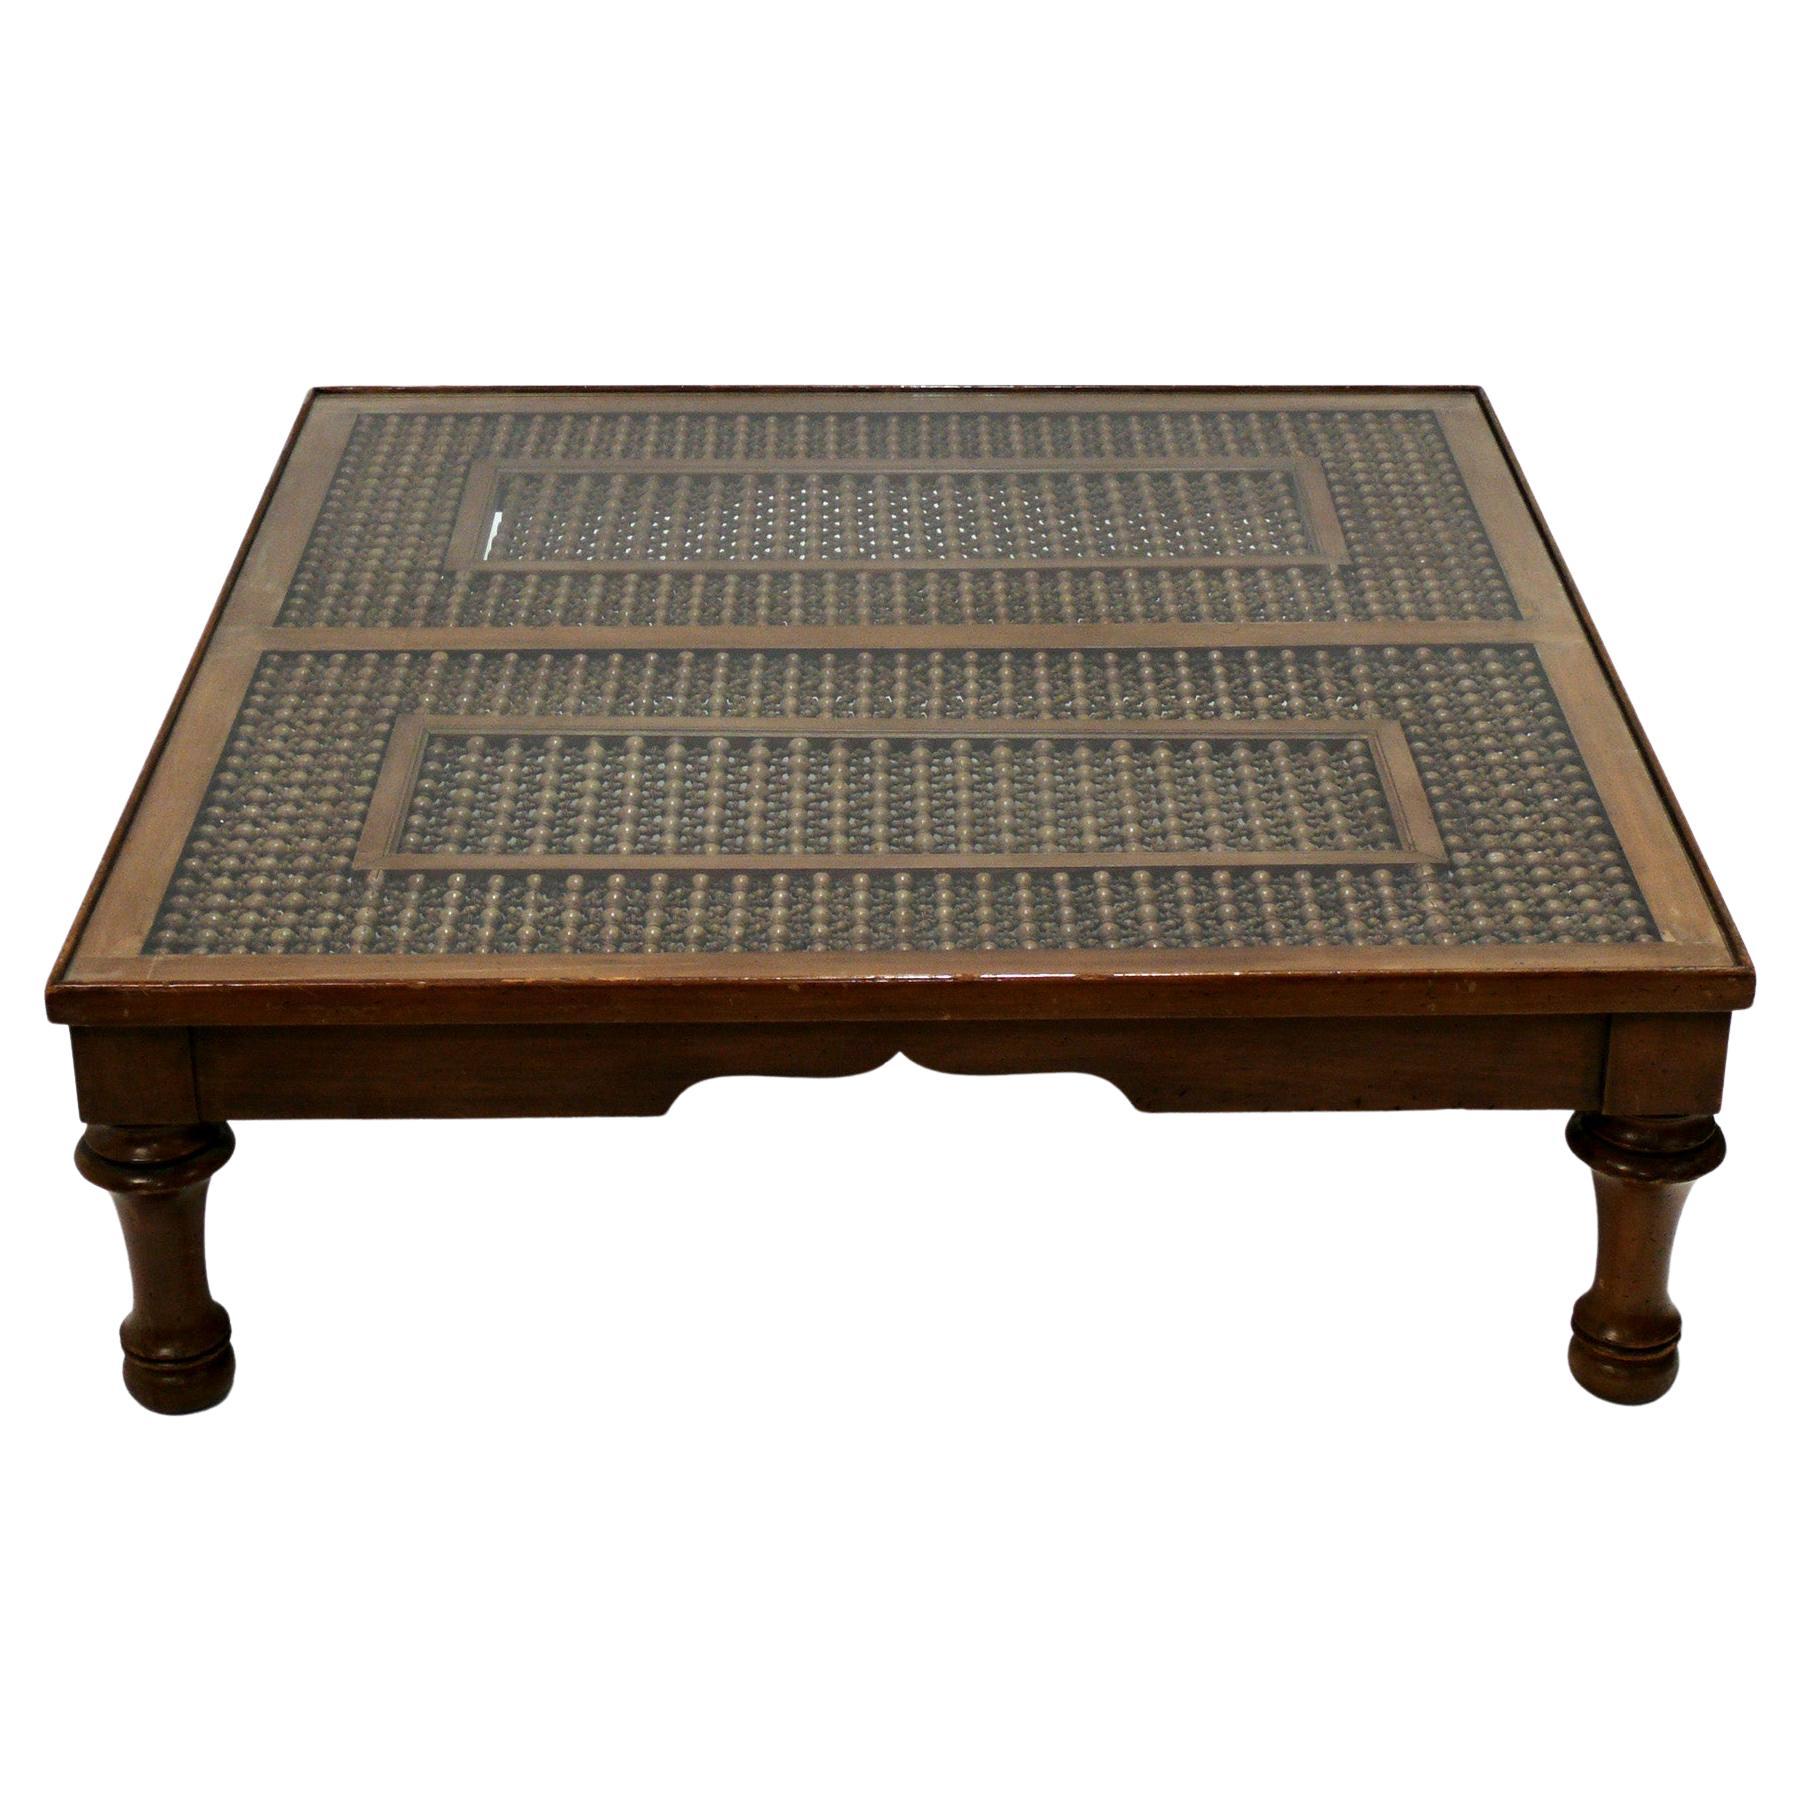 Indo Chinese Coffee Table Großes architektonisches Element